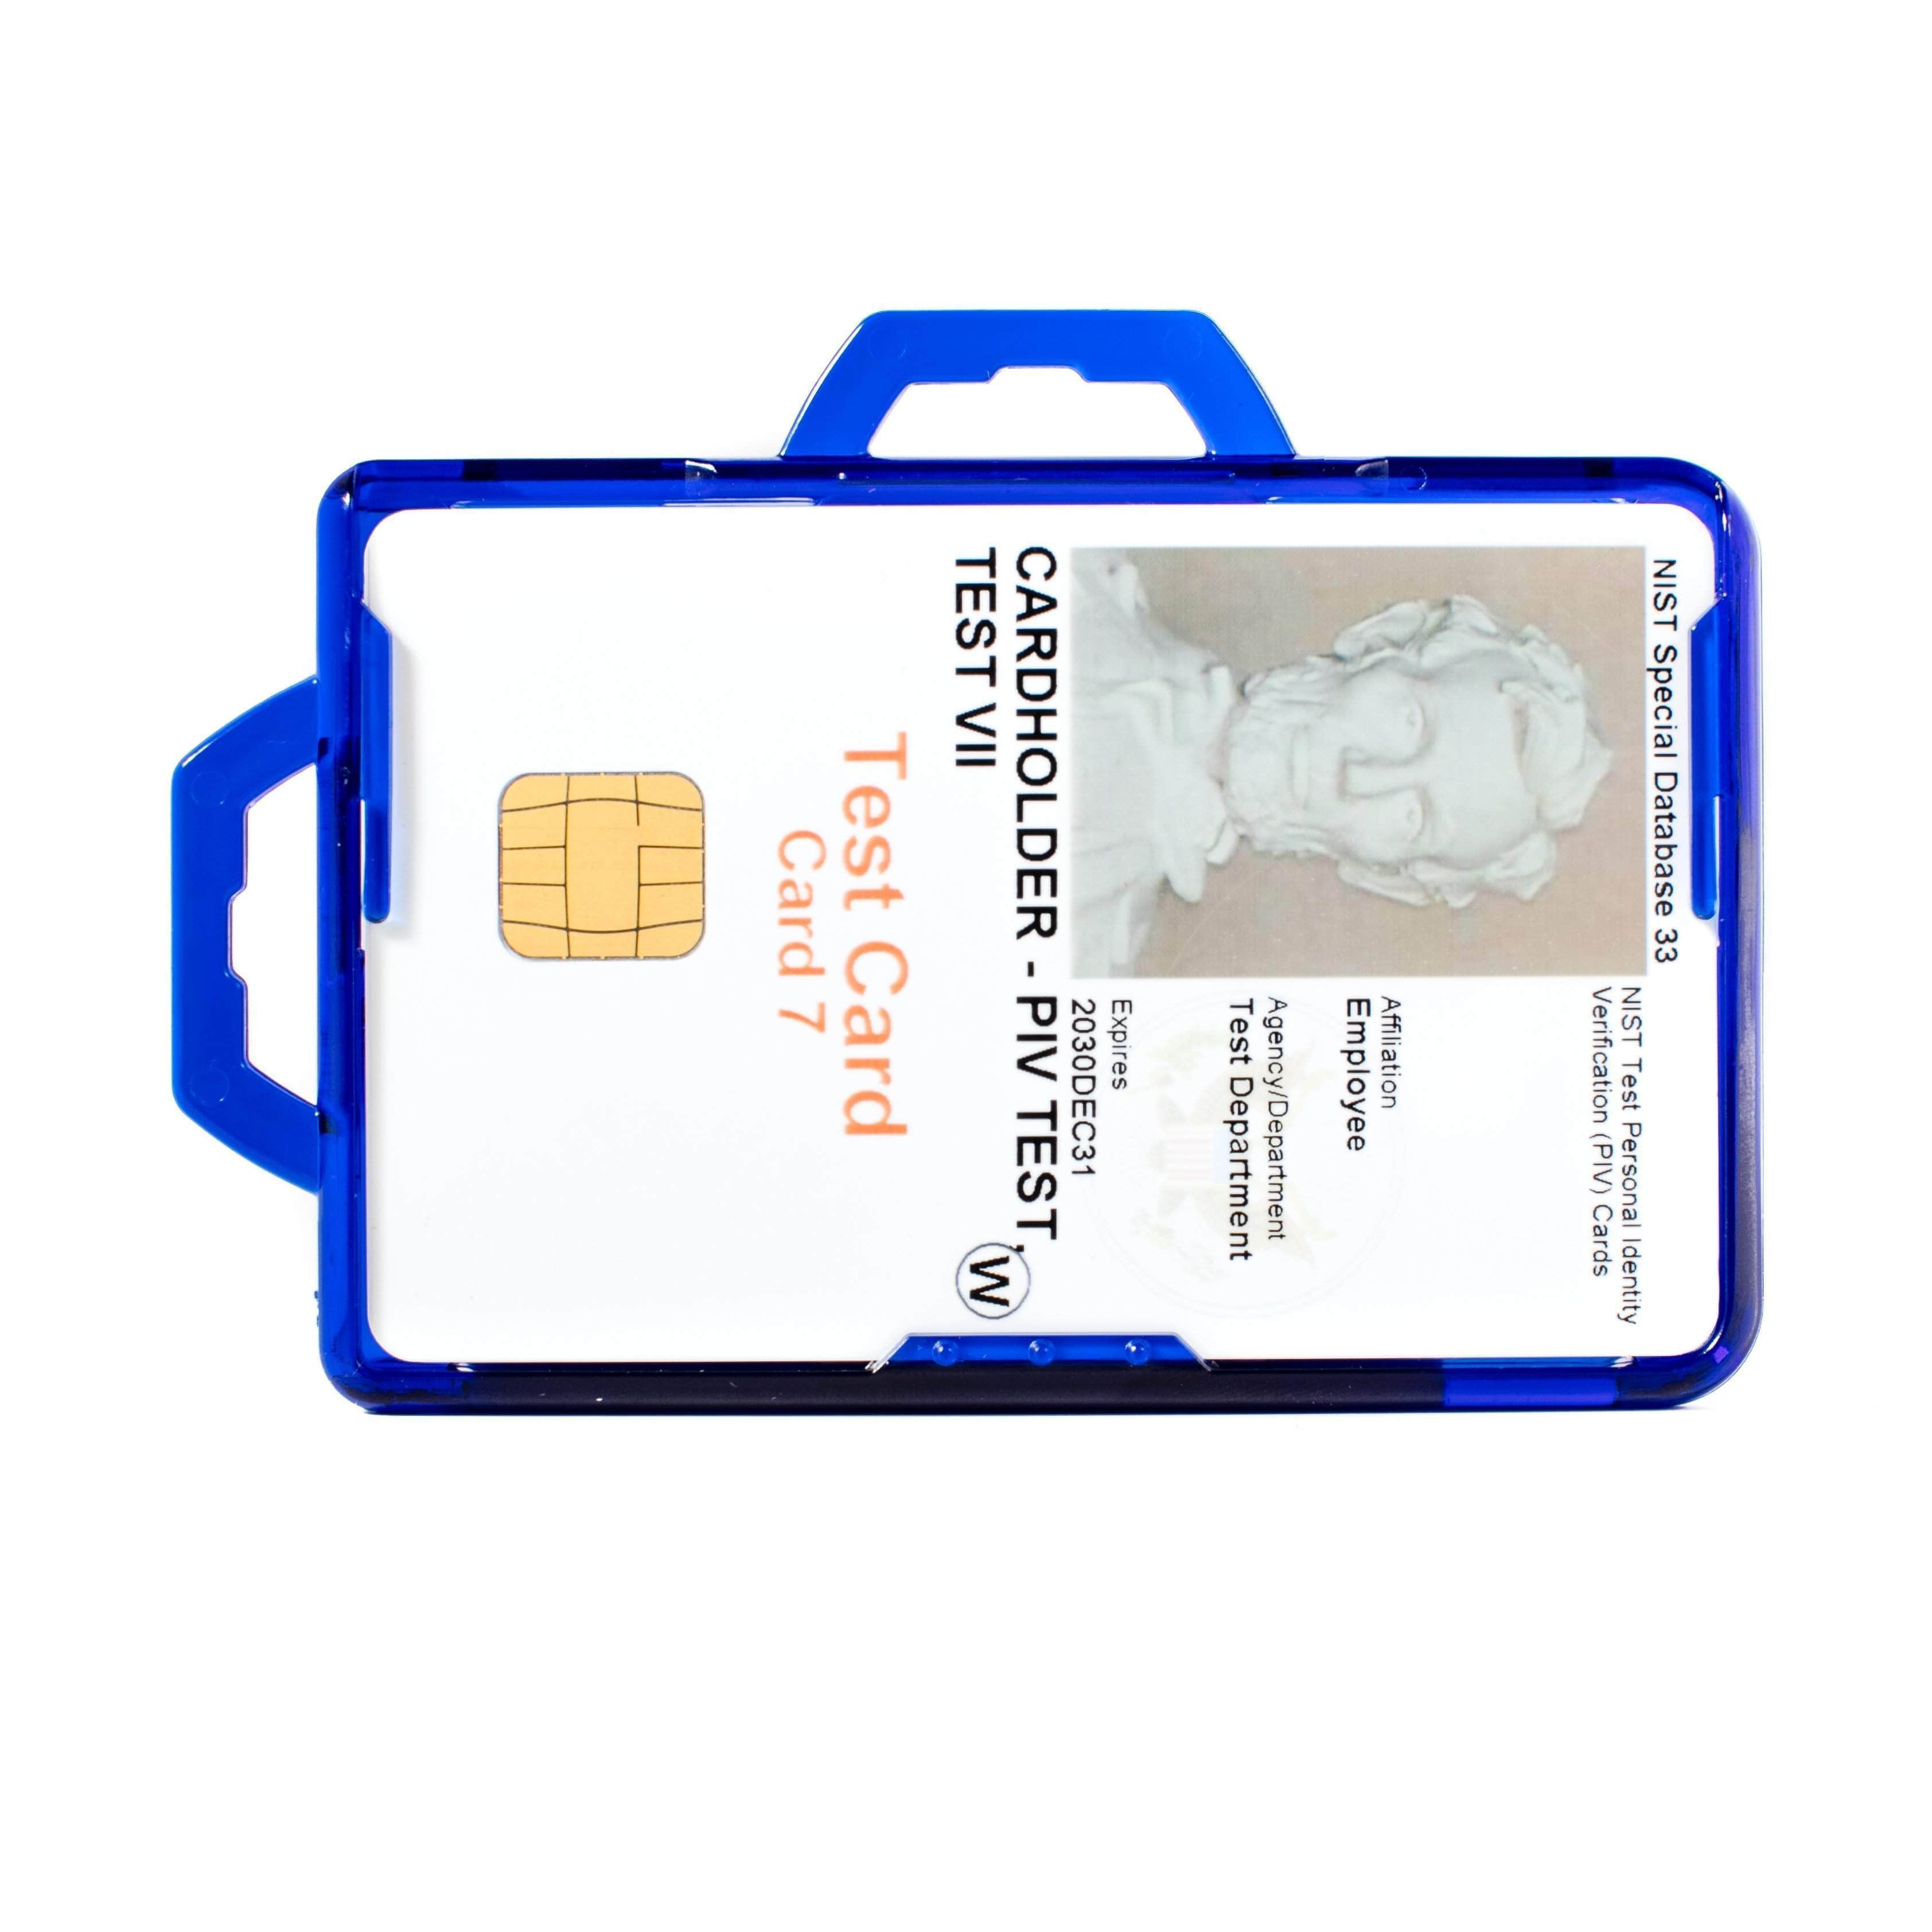 Id Card Holders  ID Badge Holders With Lanyards - ID Stronghold